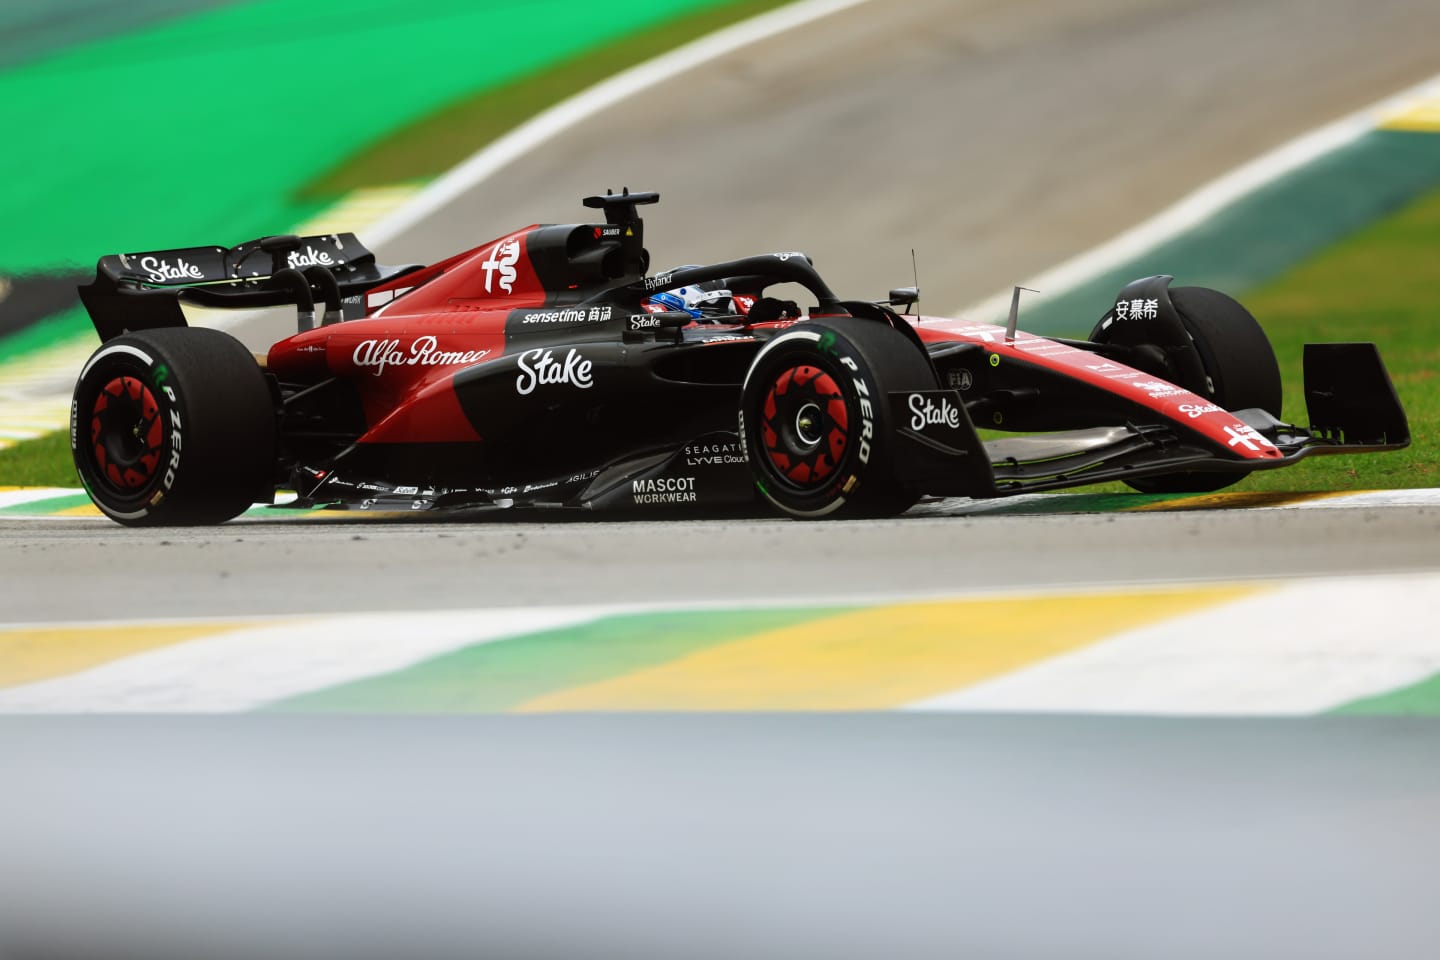 SAO PAULO, BRAZIL - NOVEMBER 03: Valtteri Bottas of Finland driving the (77) Alfa Romeo F1 C43 Ferrari on track during practice ahead of the F1 Grand Prix of Brazil at Autodromo Jose Carlos Pace on November 03, 2023 in Sao Paulo, Brazil. (Photo by Buda Mendes/Getty Images)